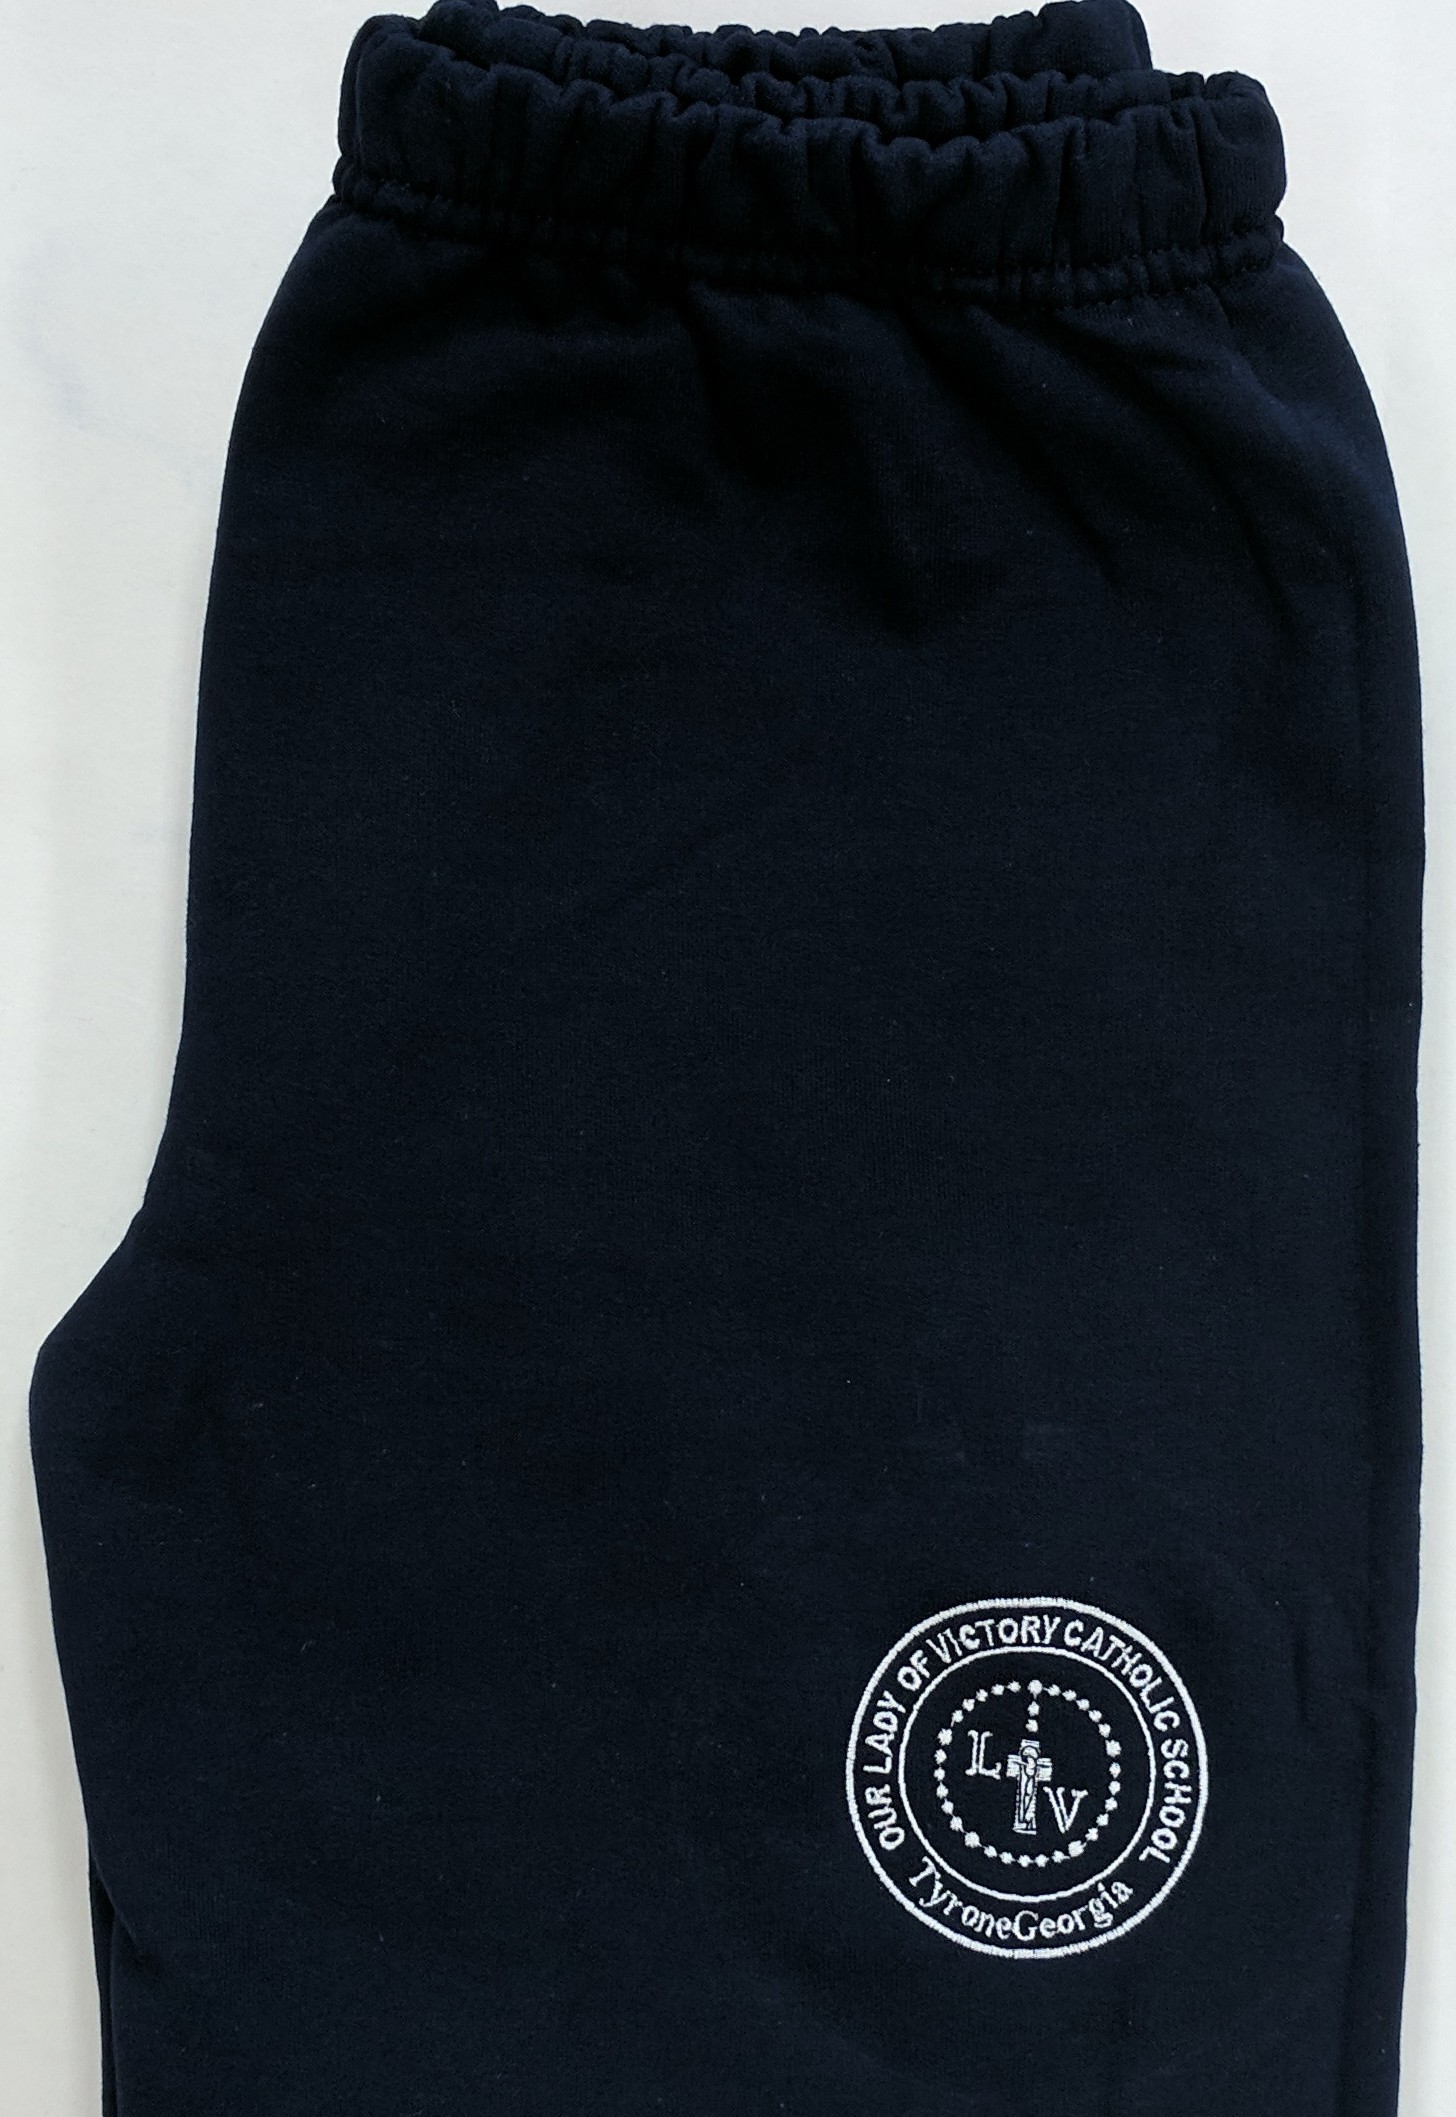 OLV-Youth/Adult sweat pant with logo